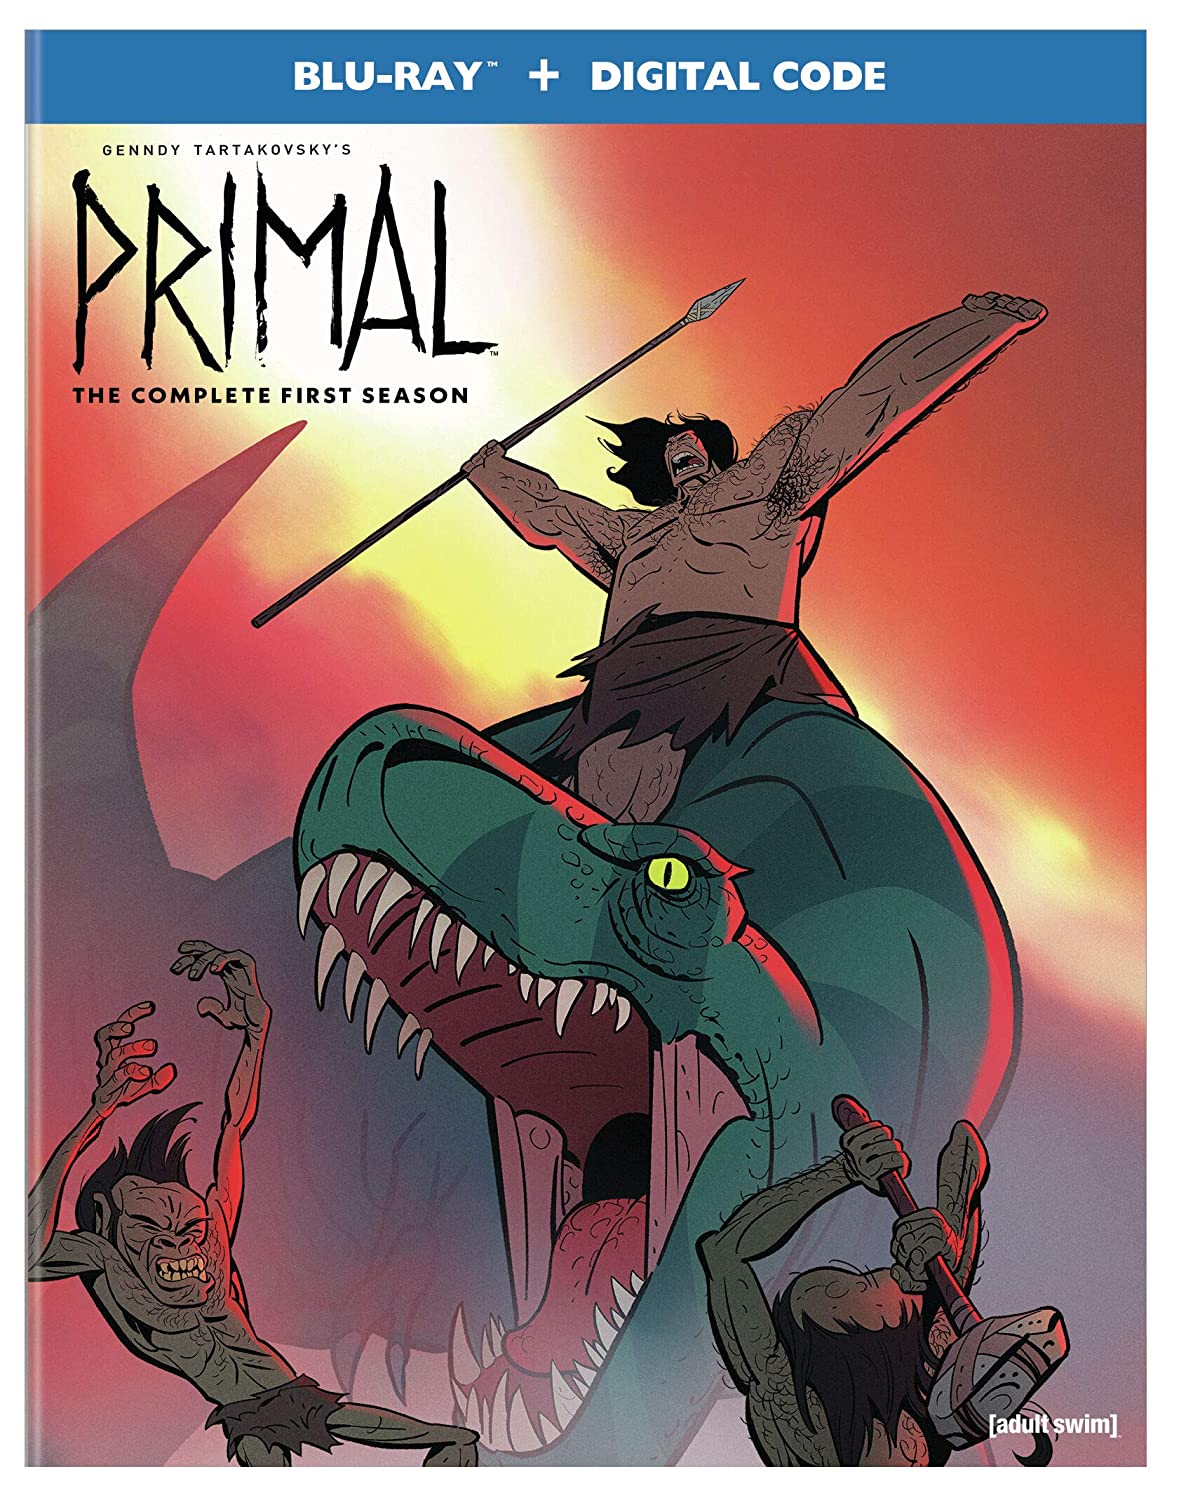 Contest PRIMAL Season 1 Blu-ray Cartoon Network and Adult Swims Animated TV Series set in a Primordial World FilmBook